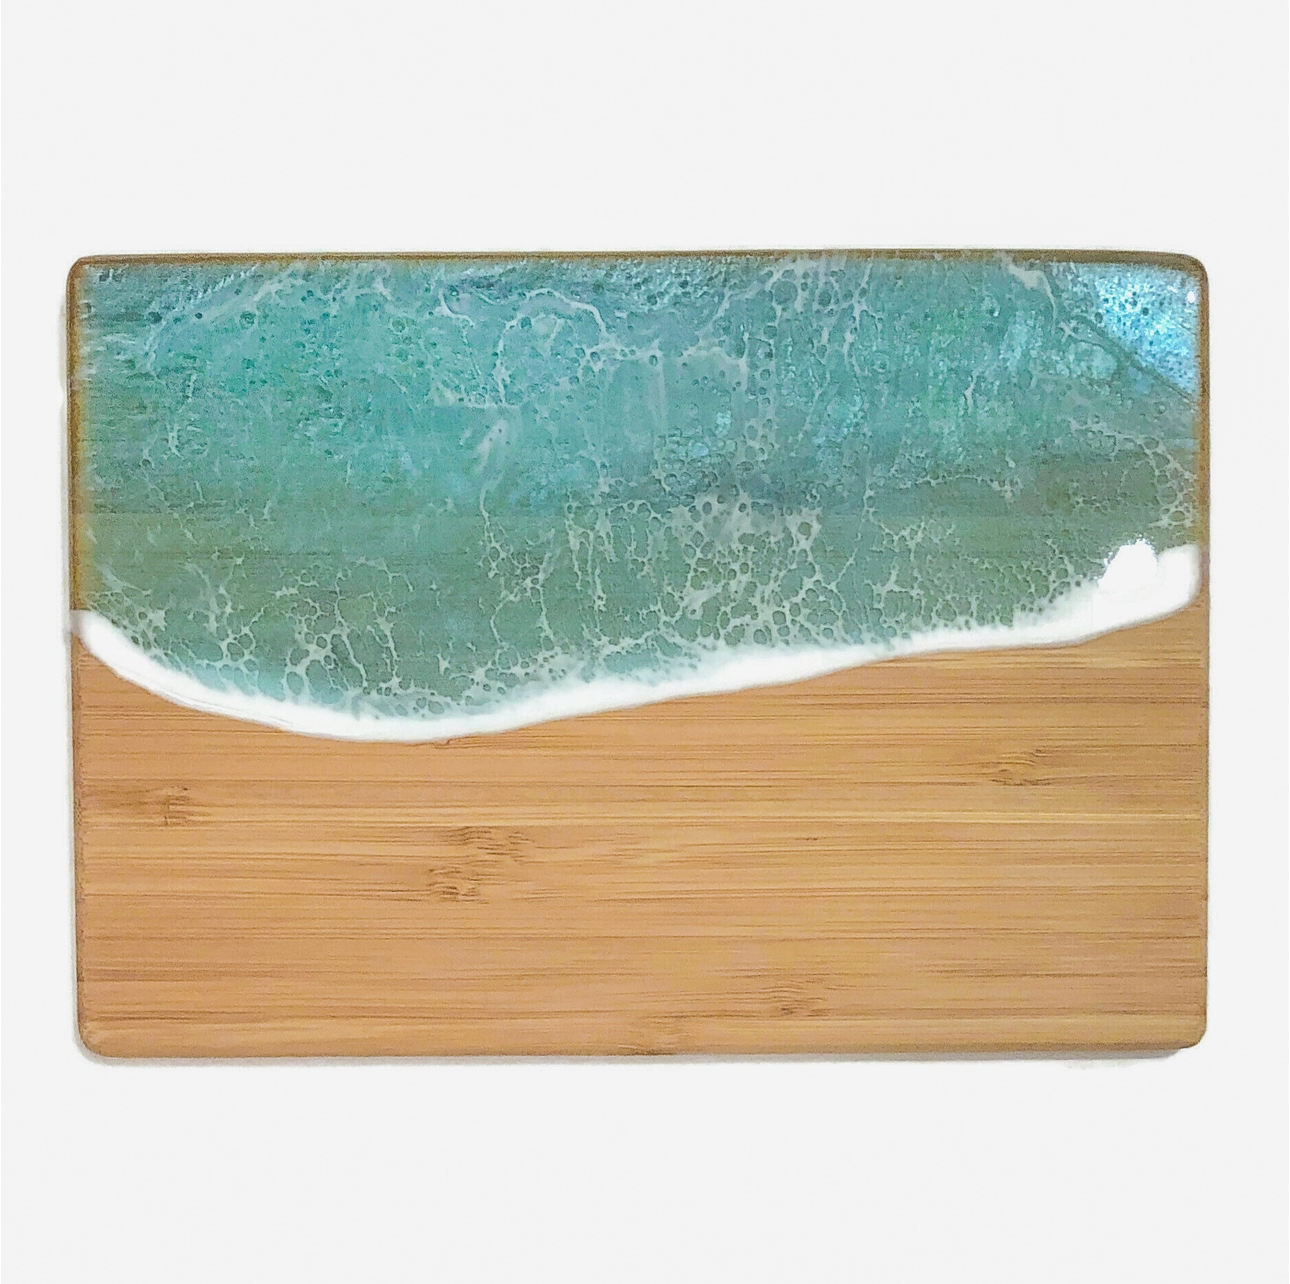 Small Cutting Board in Mermaid Tail - Heart of the Home LV